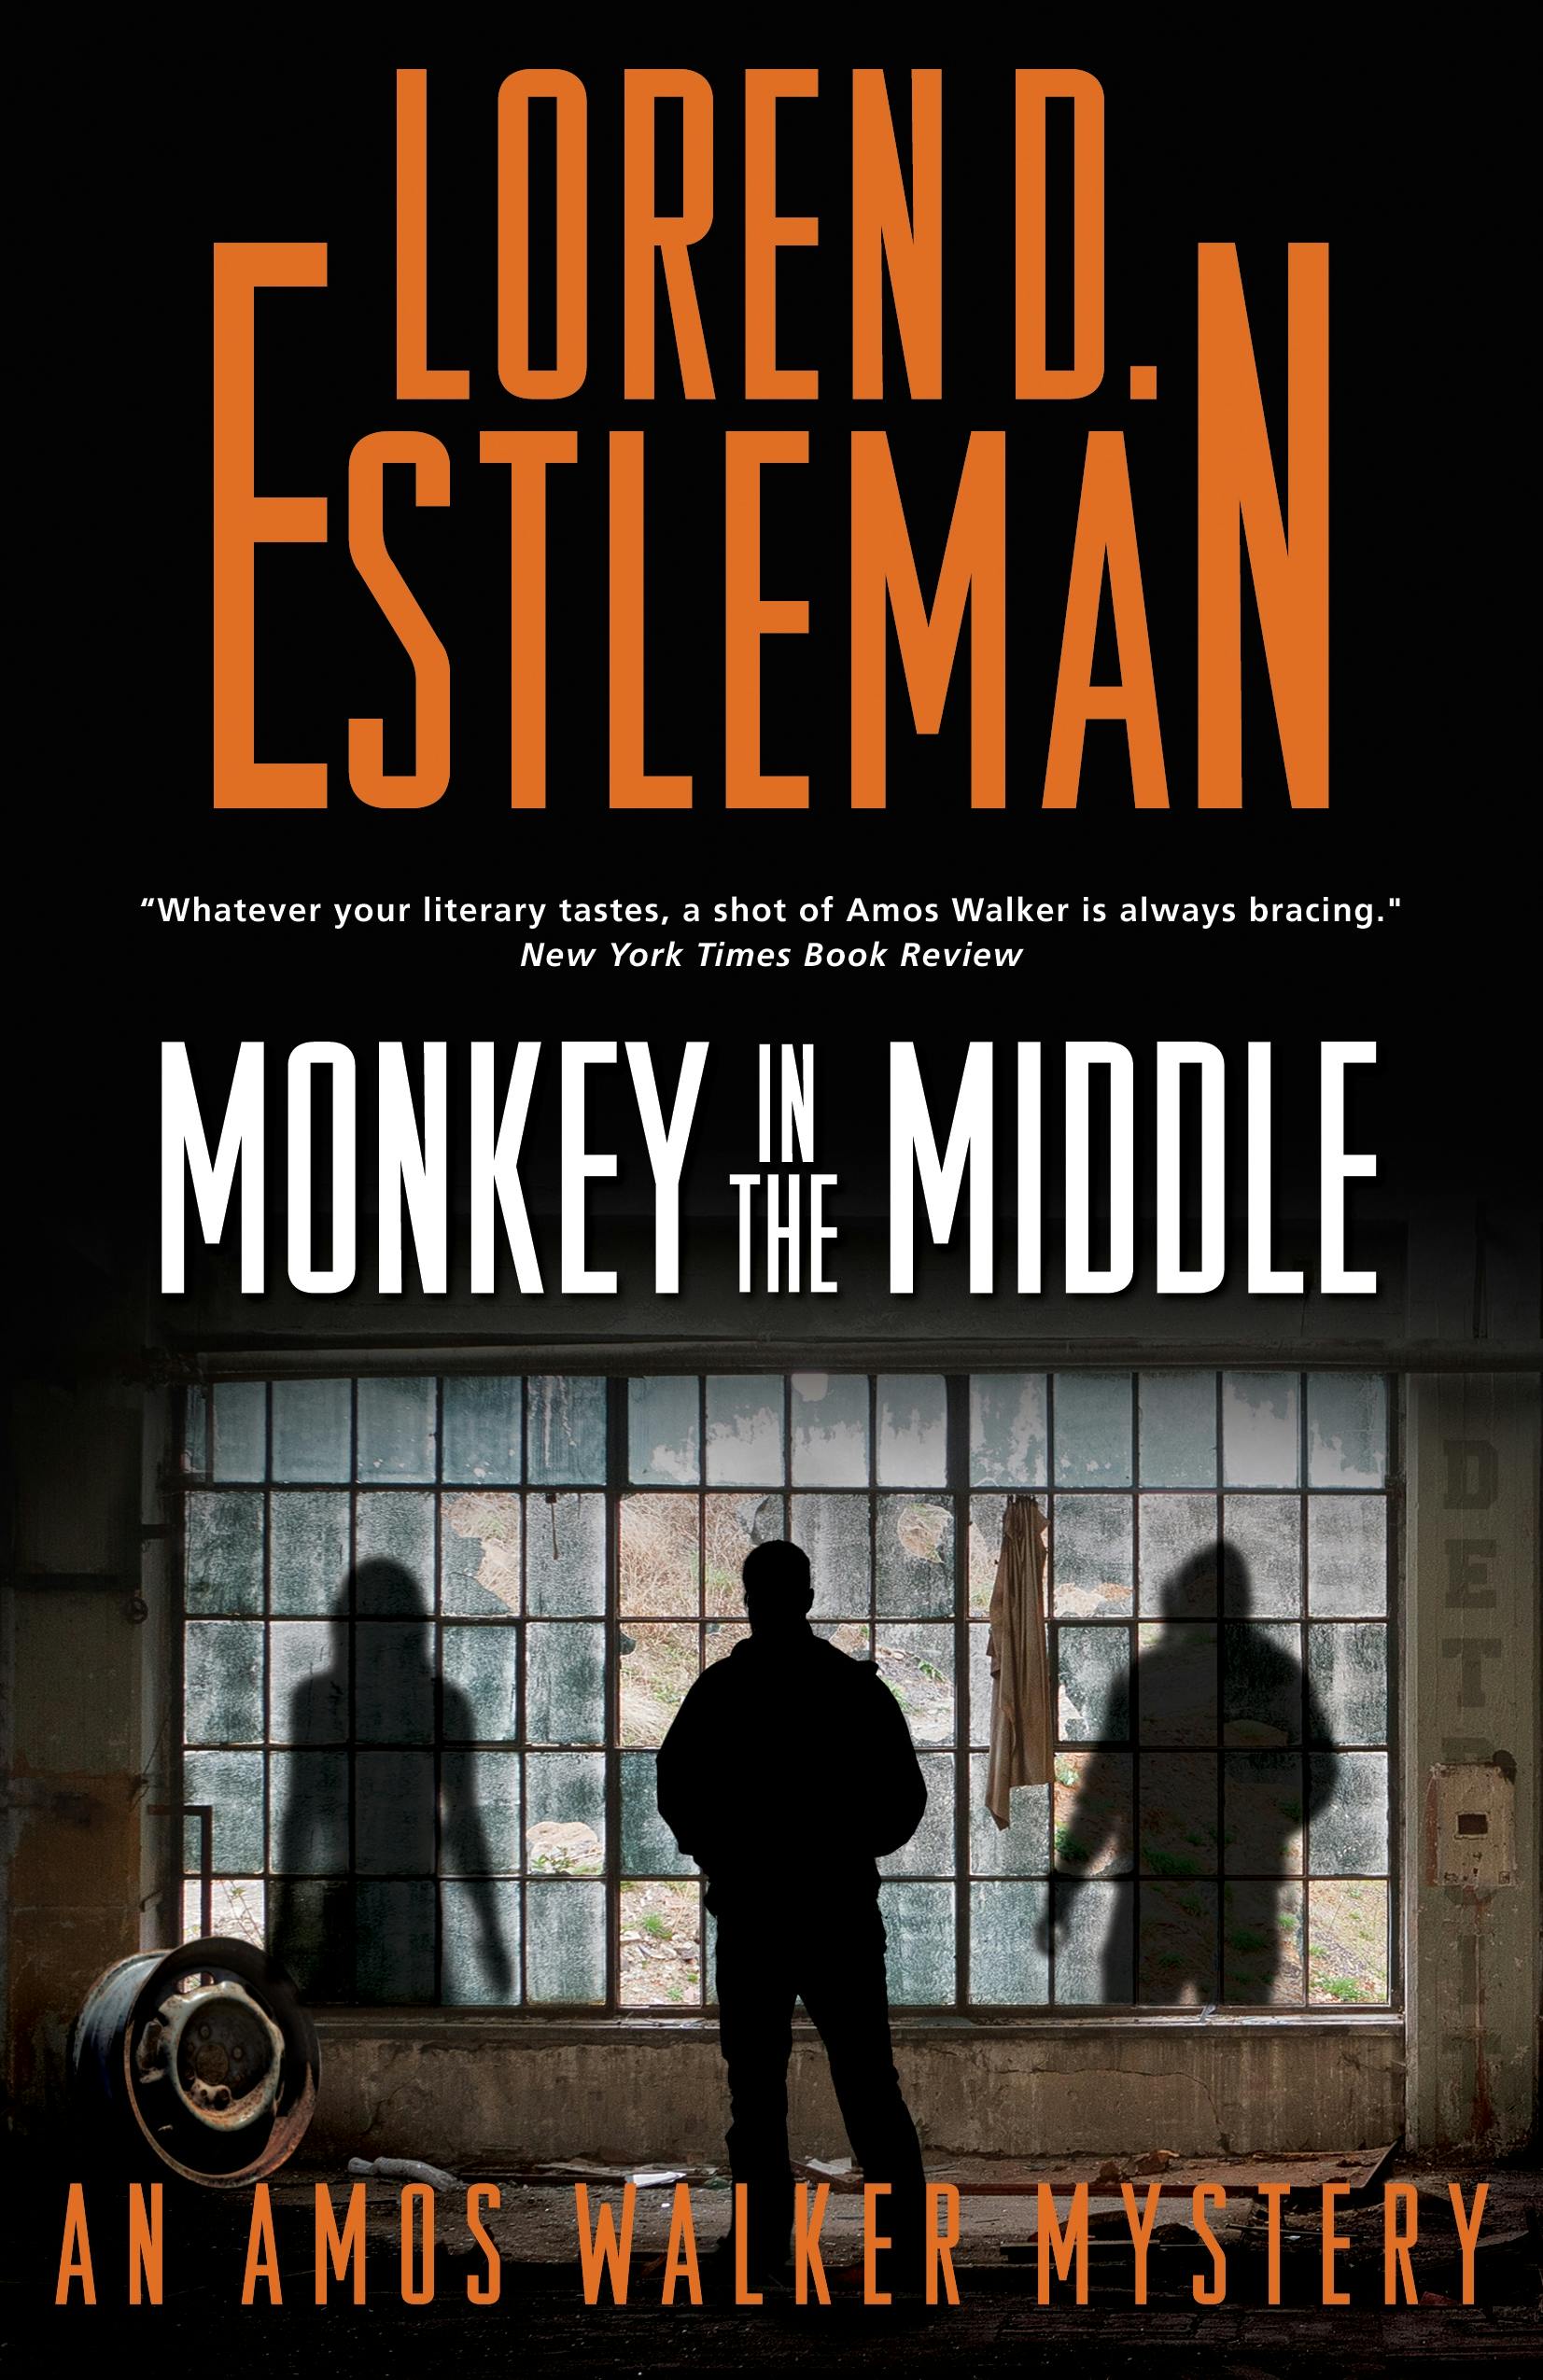 Cover for the book titled as: Monkey in the Middle